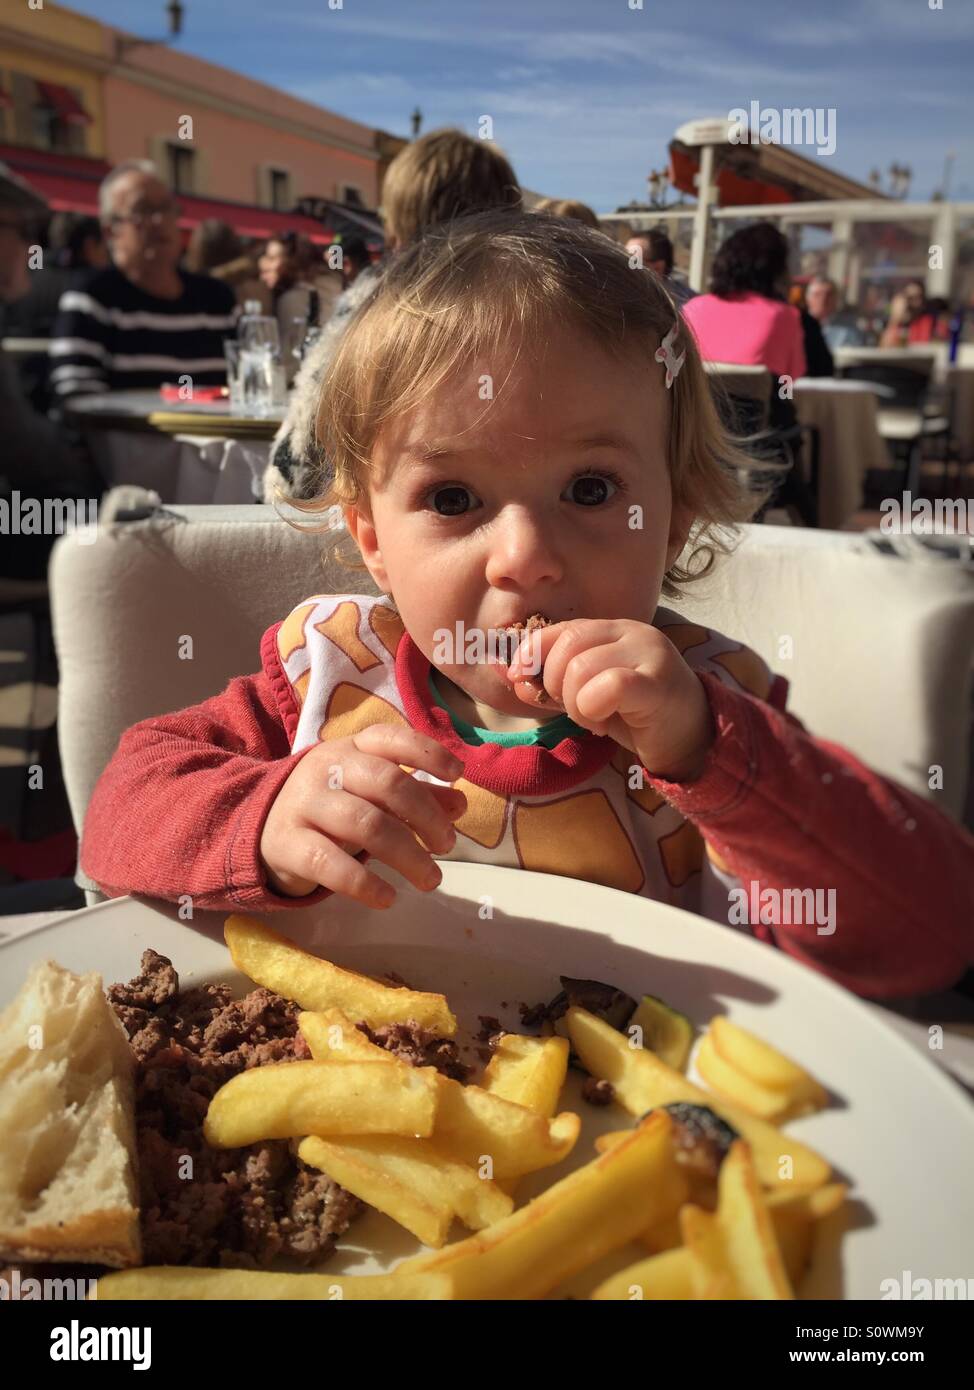 One year old baby eating French fries ands burger by herself Stock Photo